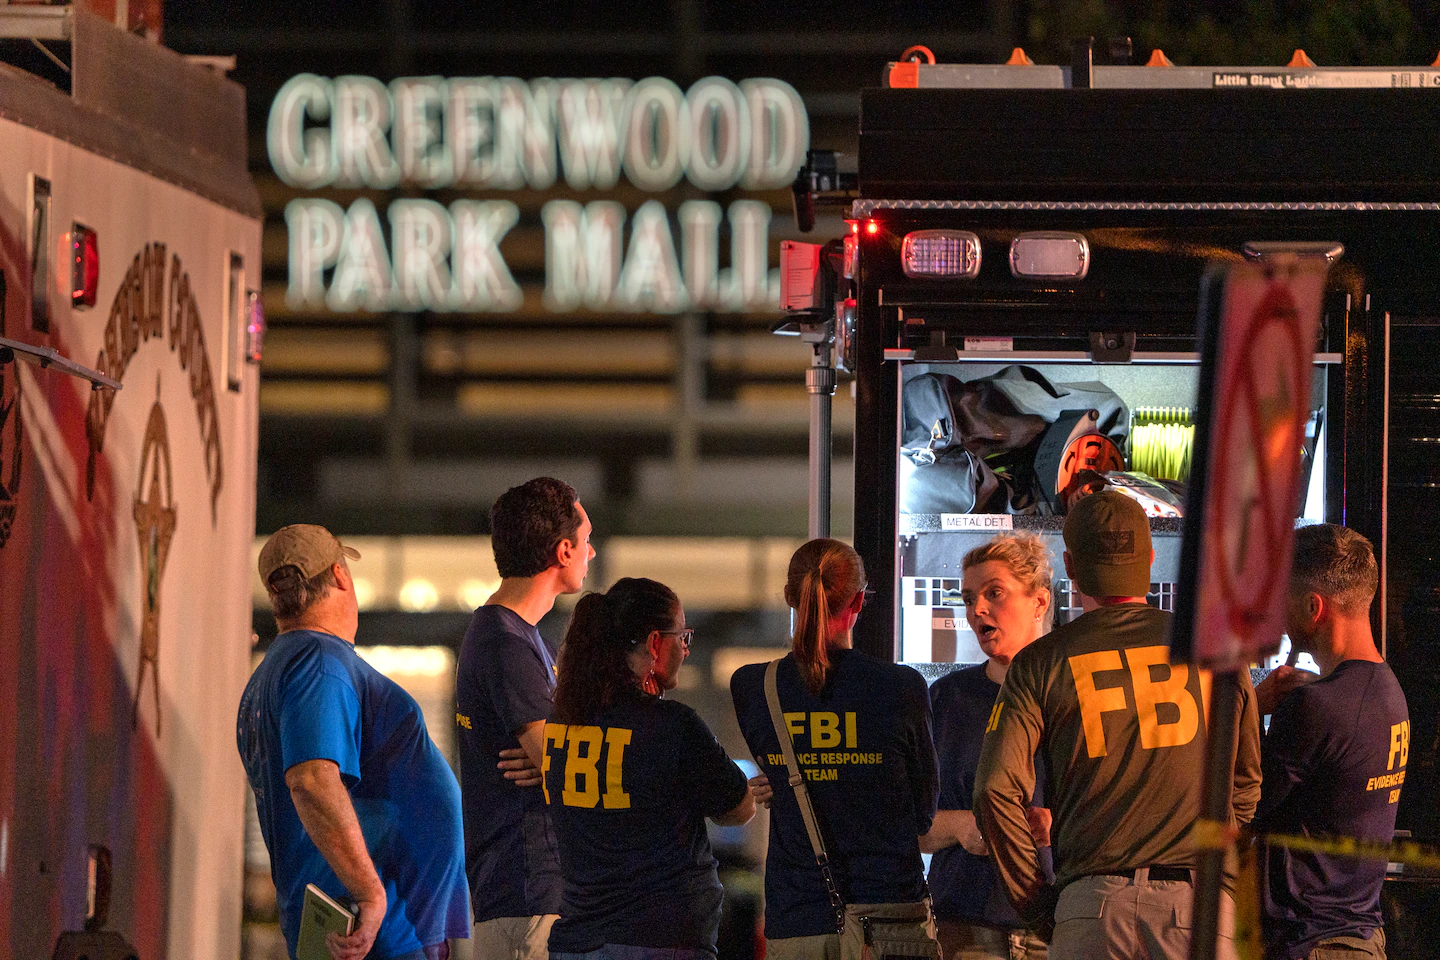 You are currently viewing Greenwood Park Mall shooting: Jonathan Sapirman killed three people, police say